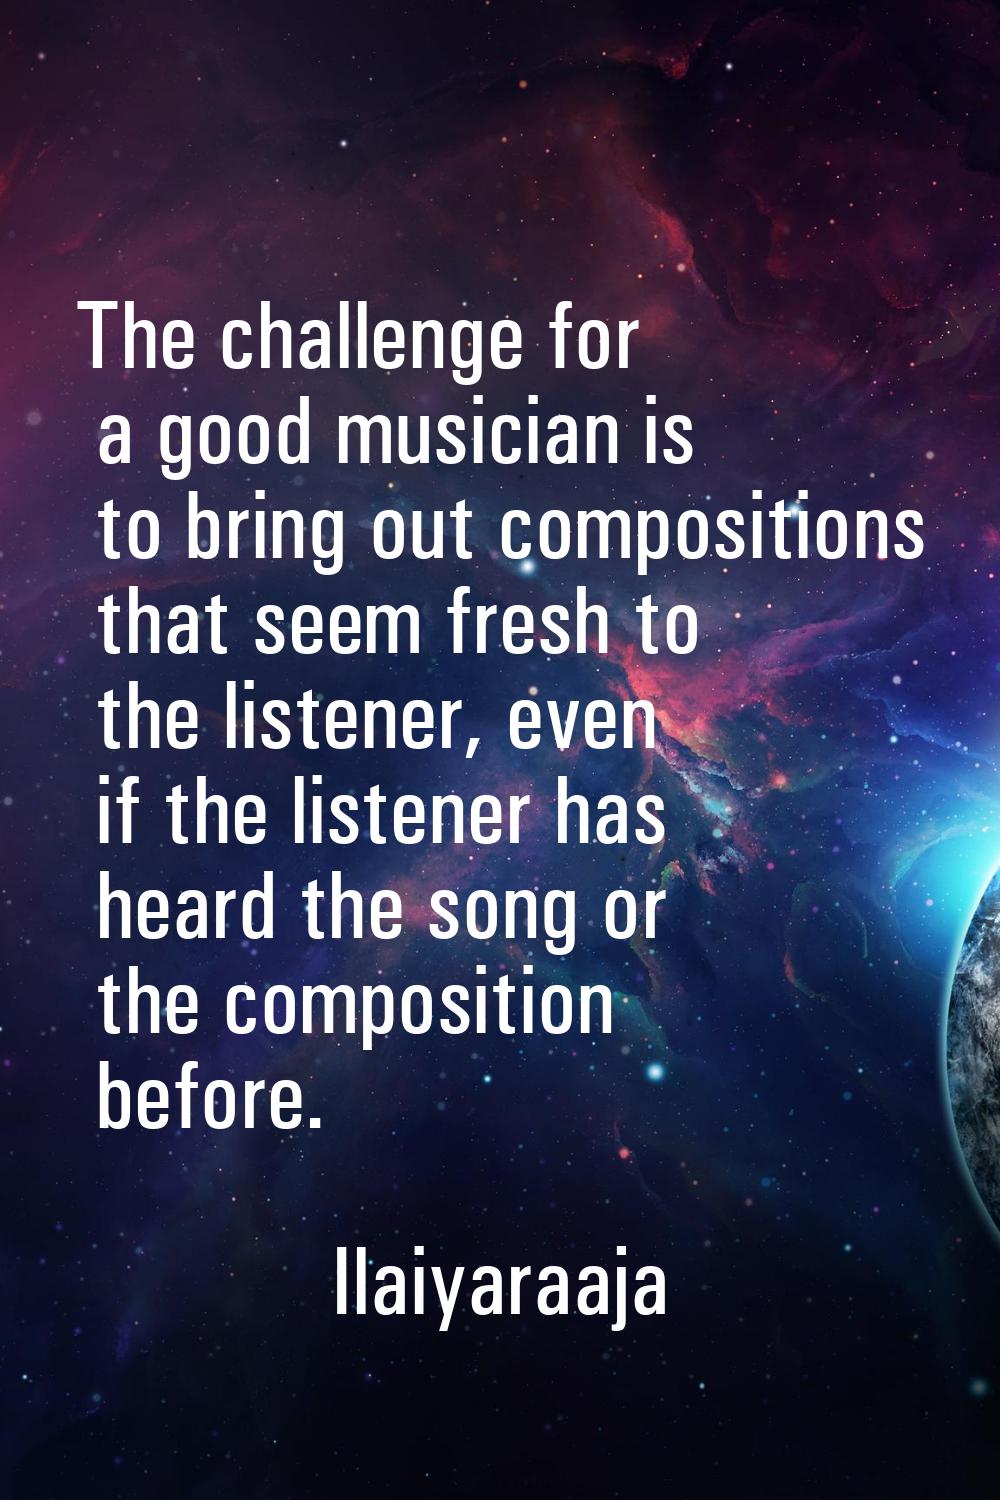 The challenge for a good musician is to bring out compositions that seem fresh to the listener, eve